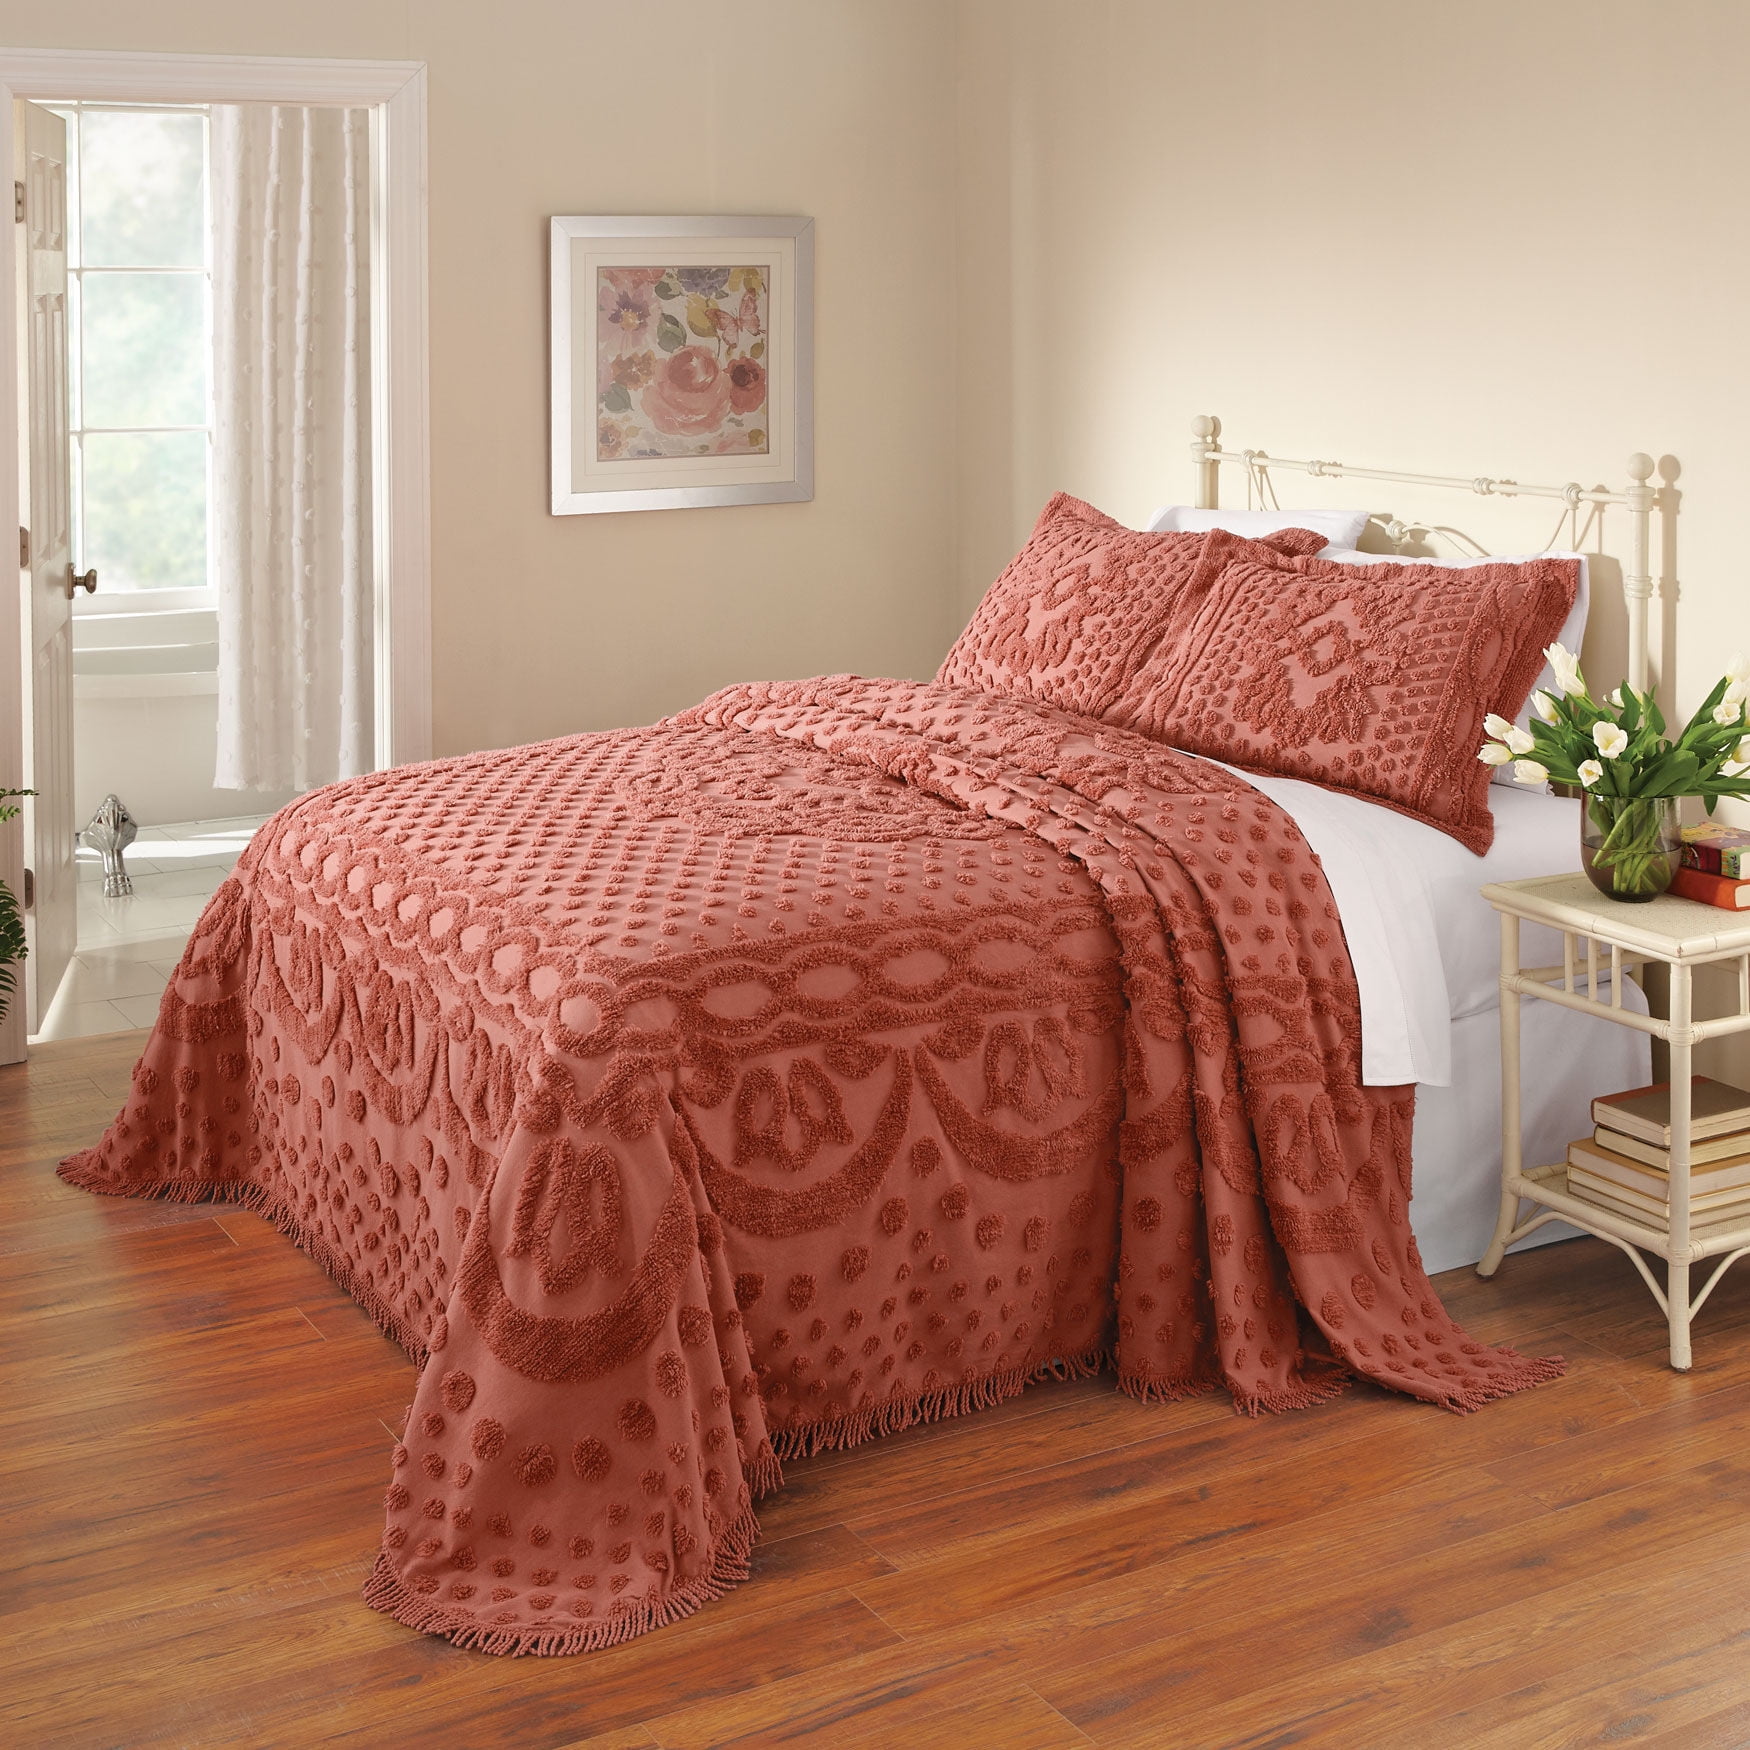 - BrylaneHome Gold Bedspread Georgia Pattern with 100% Medallion Chenille Ultra-Soft TWIN, Cotton